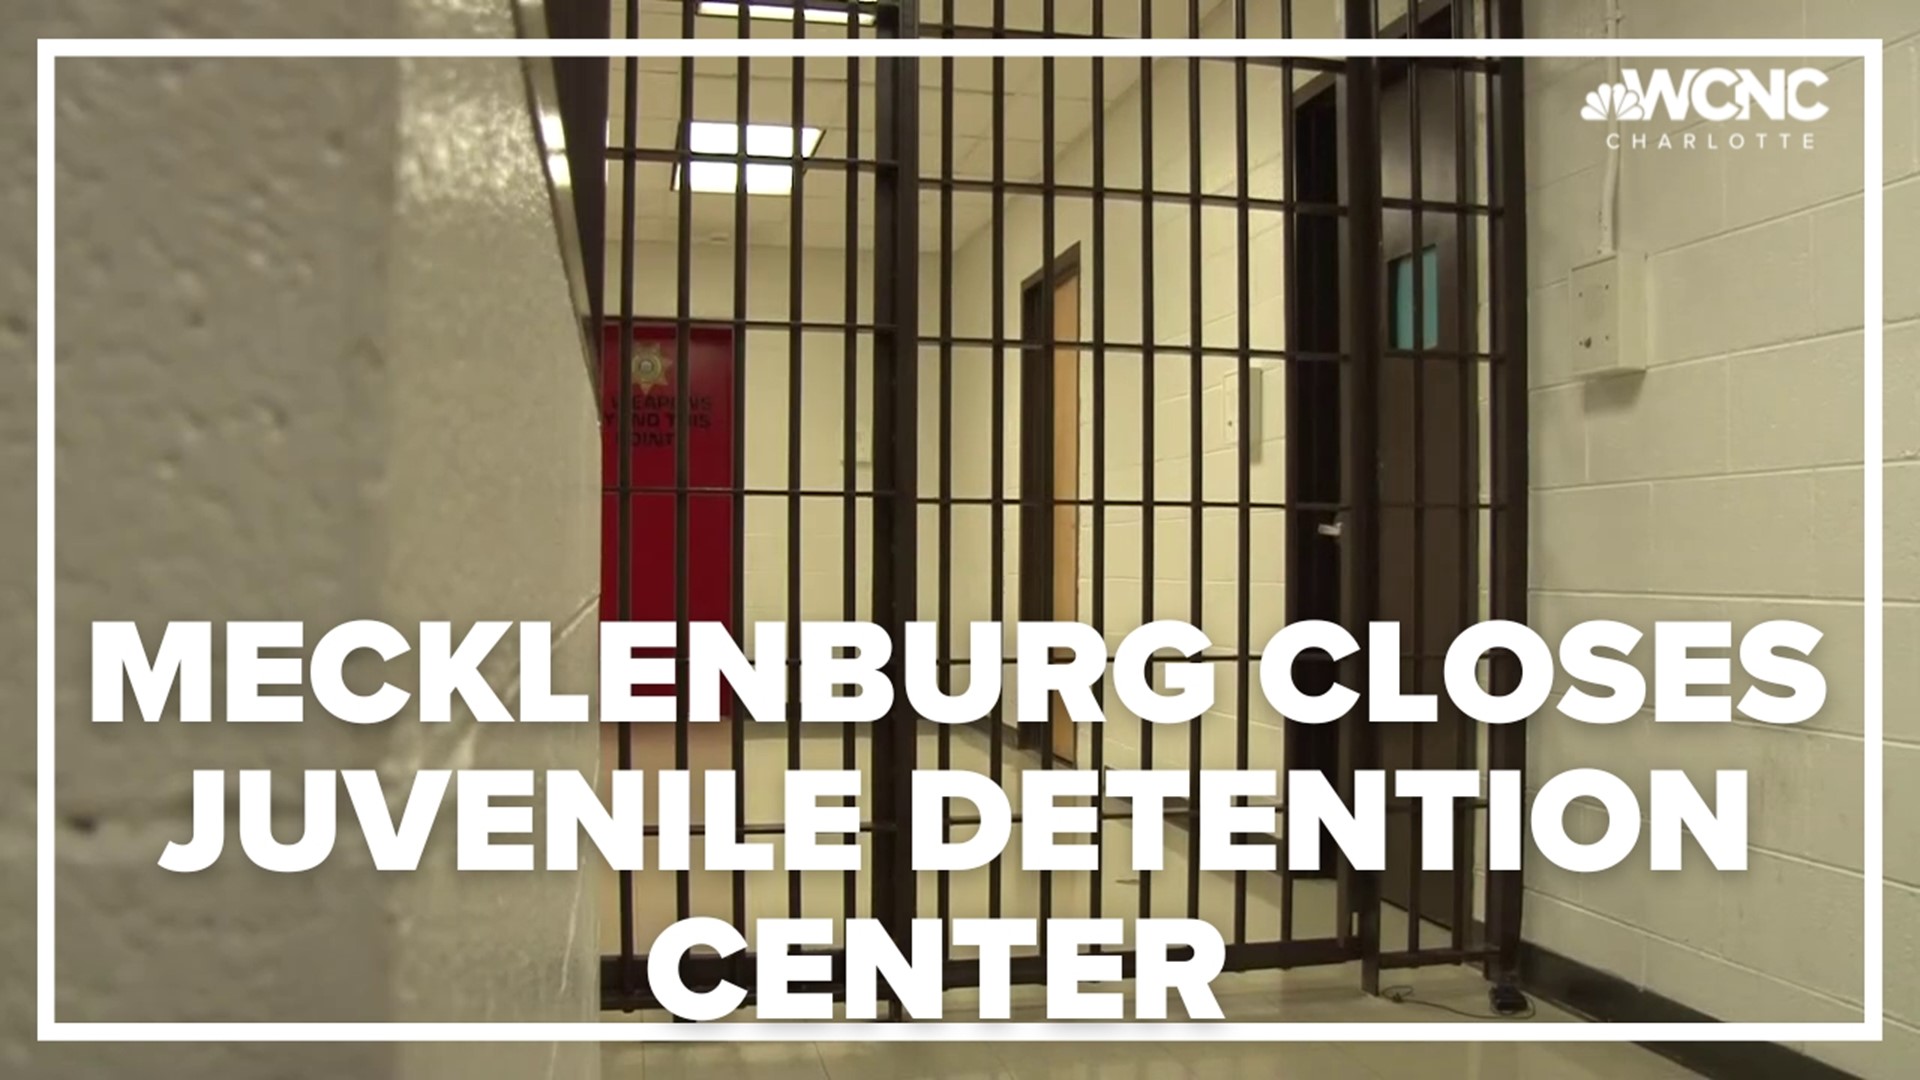 The Mecklenburg County Sheriff's Office is moving forward with plans to shut down its juvenile detention center.